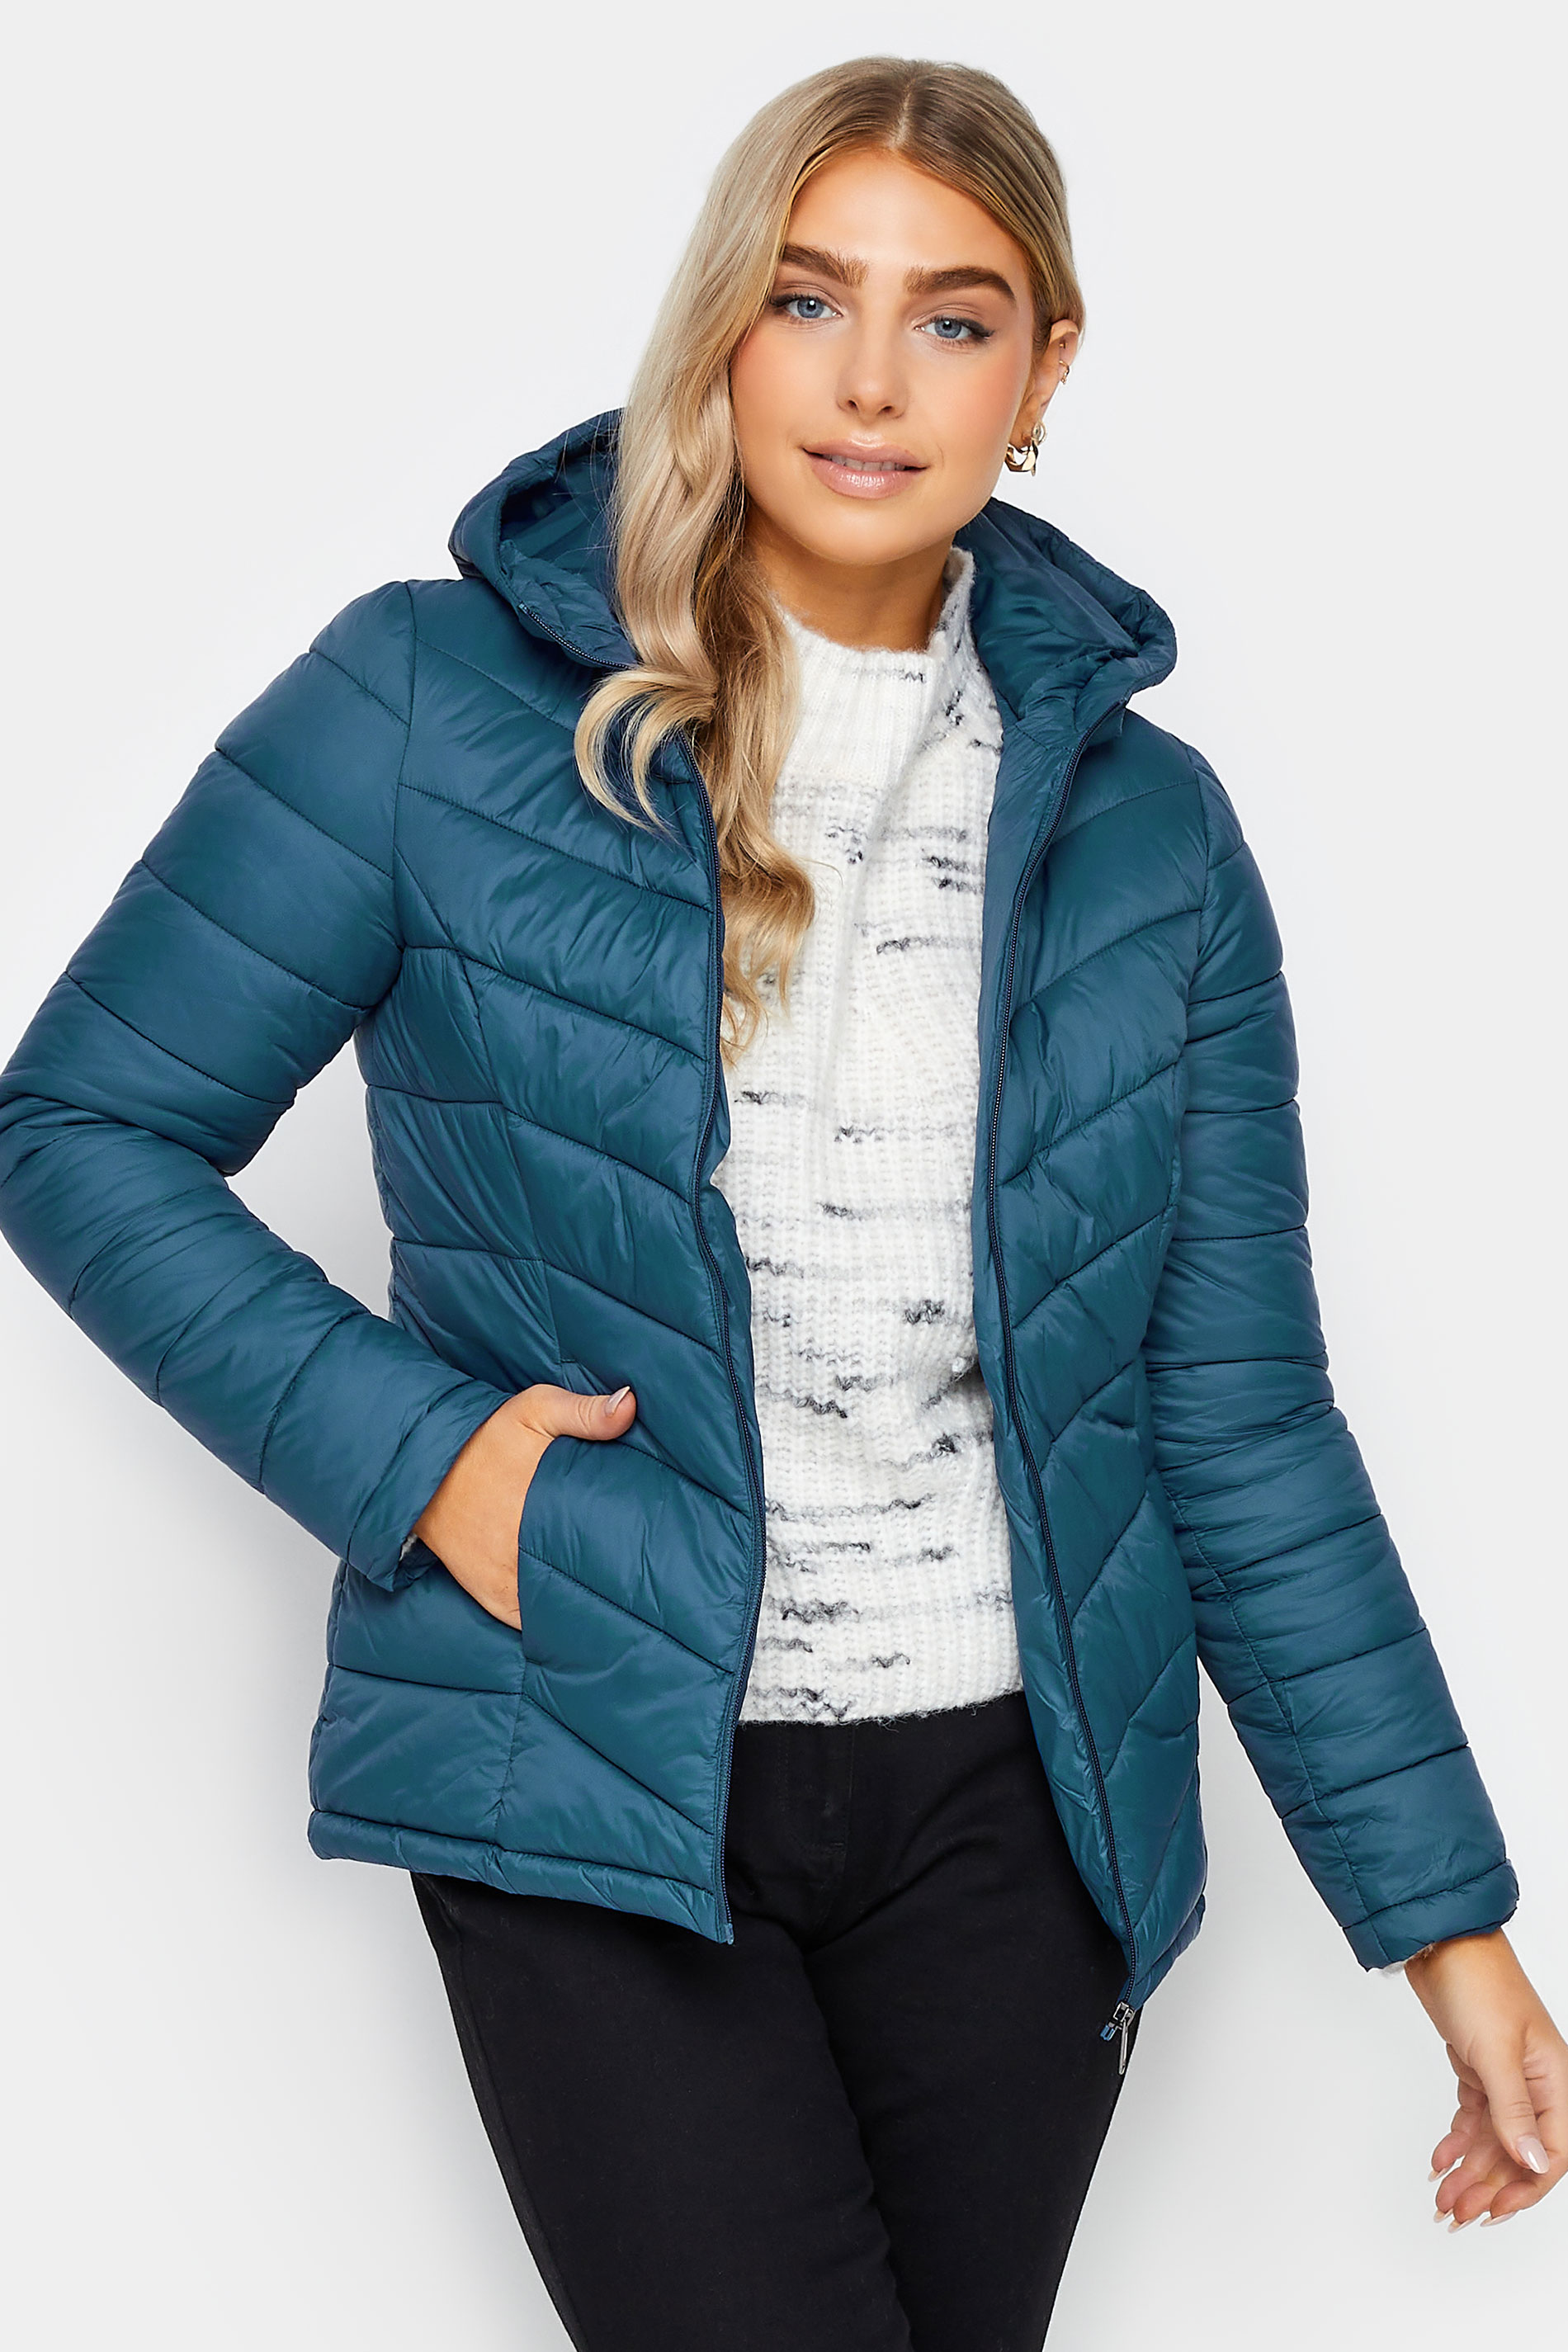 M&Co Teal Blue Quilted Jacket | M&Co 1